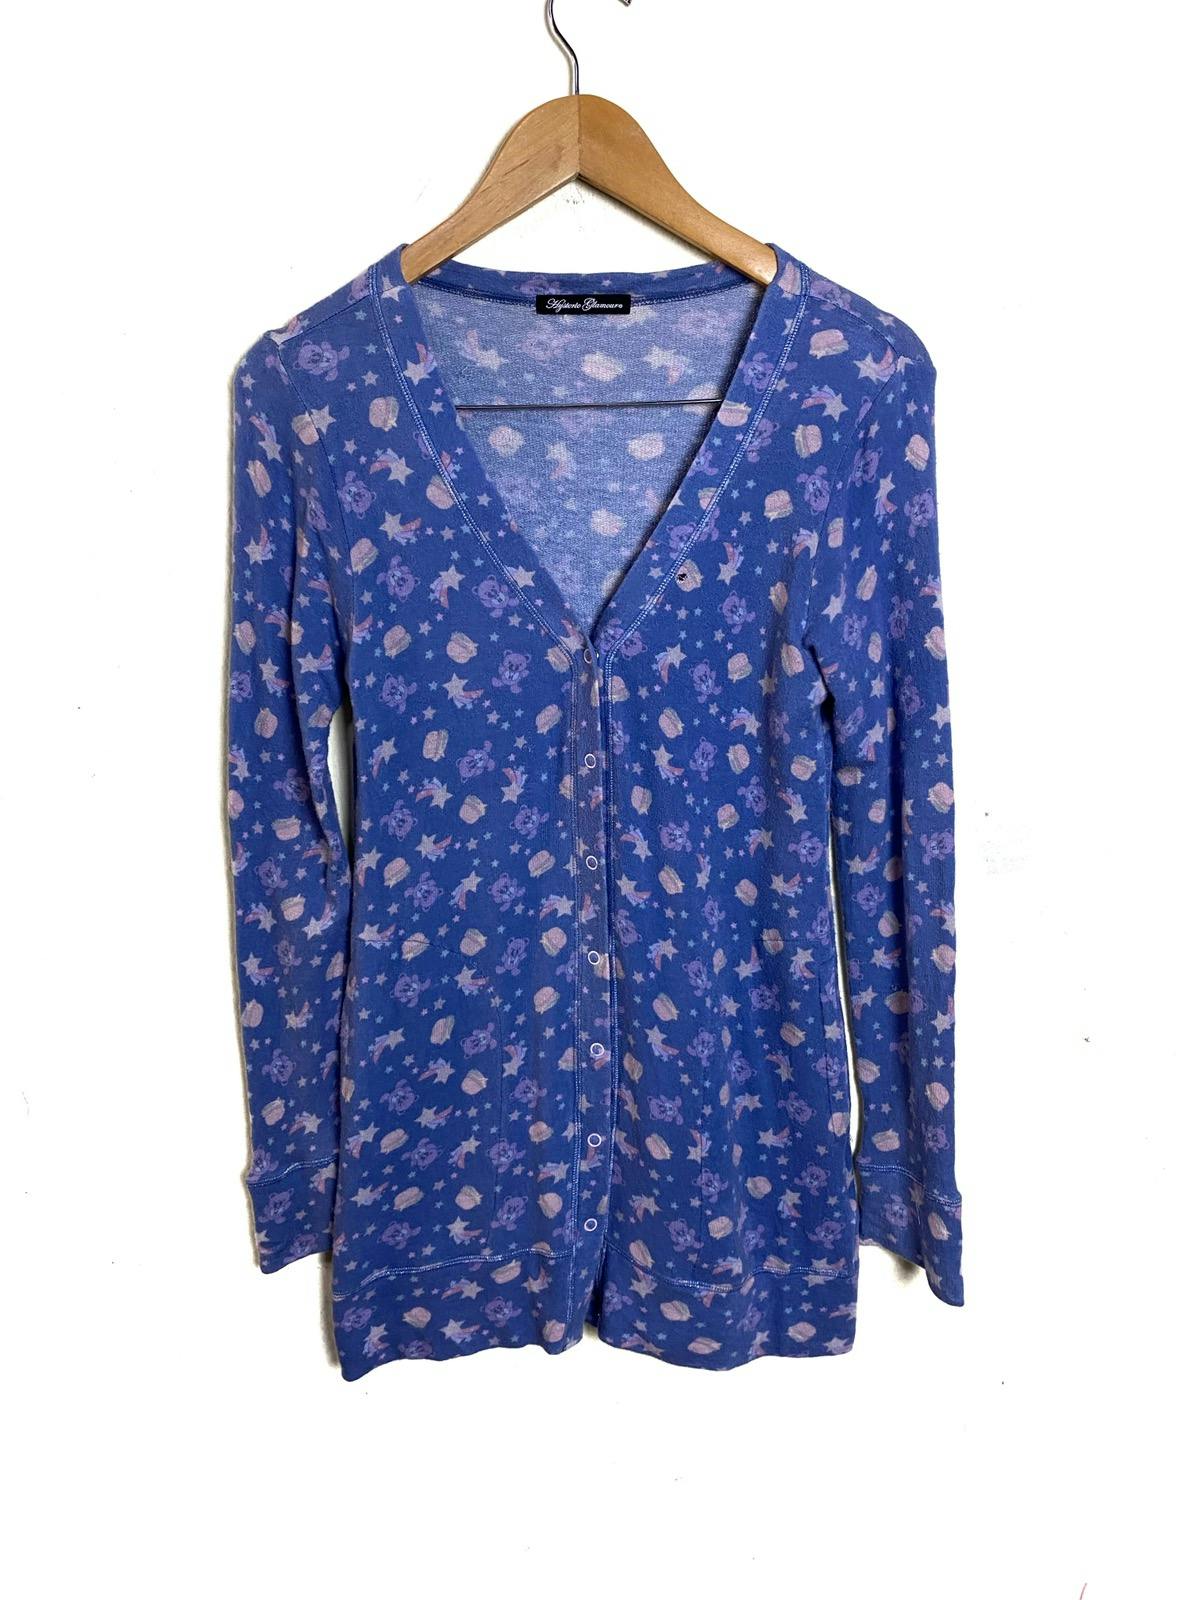 Vintage Hysteric Glamour Cardigan - 1